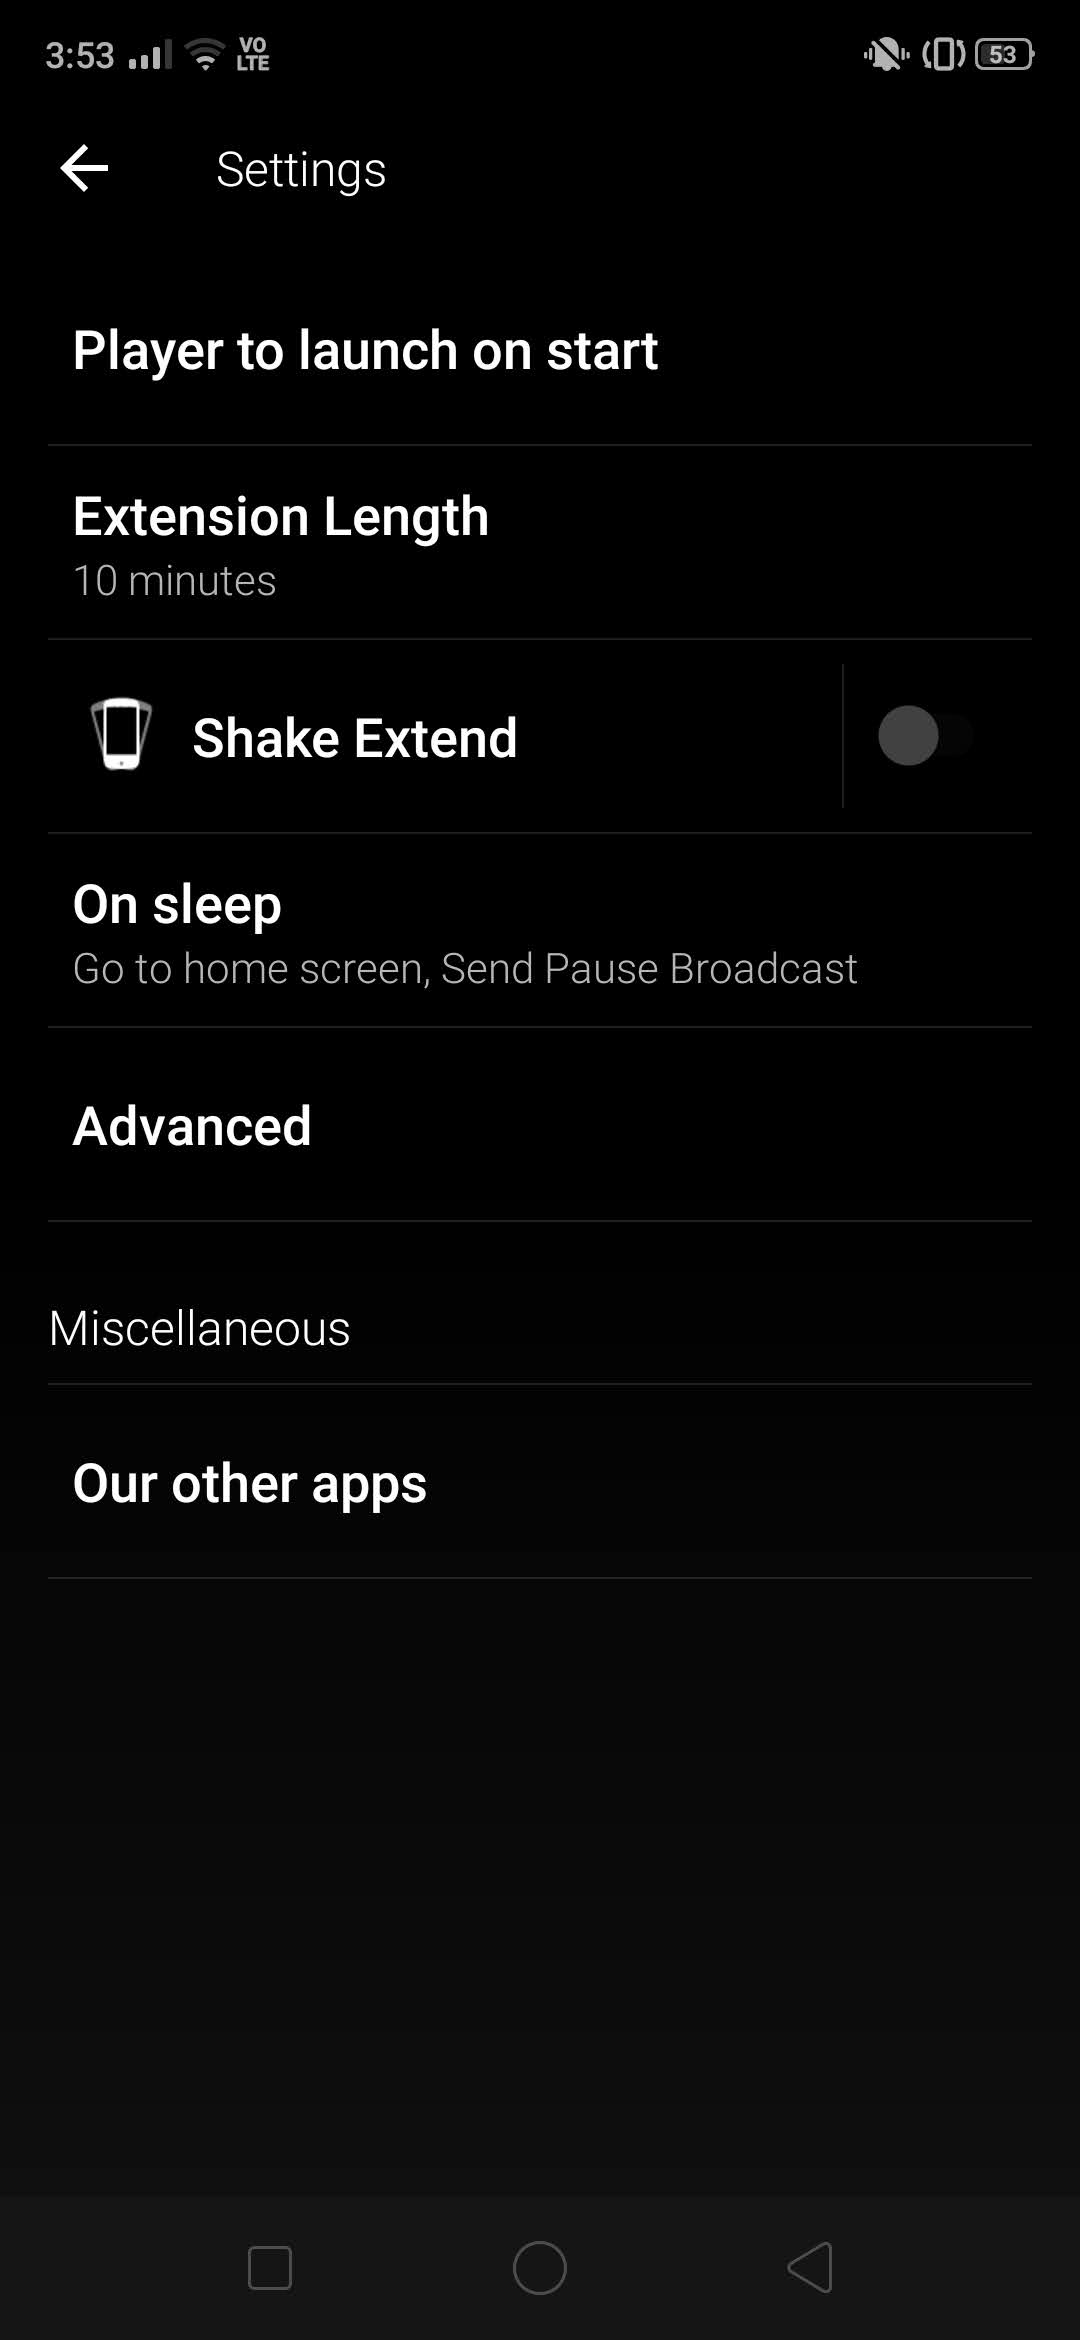 You can also launch your preferred music application from the Sleep Timer app itself.